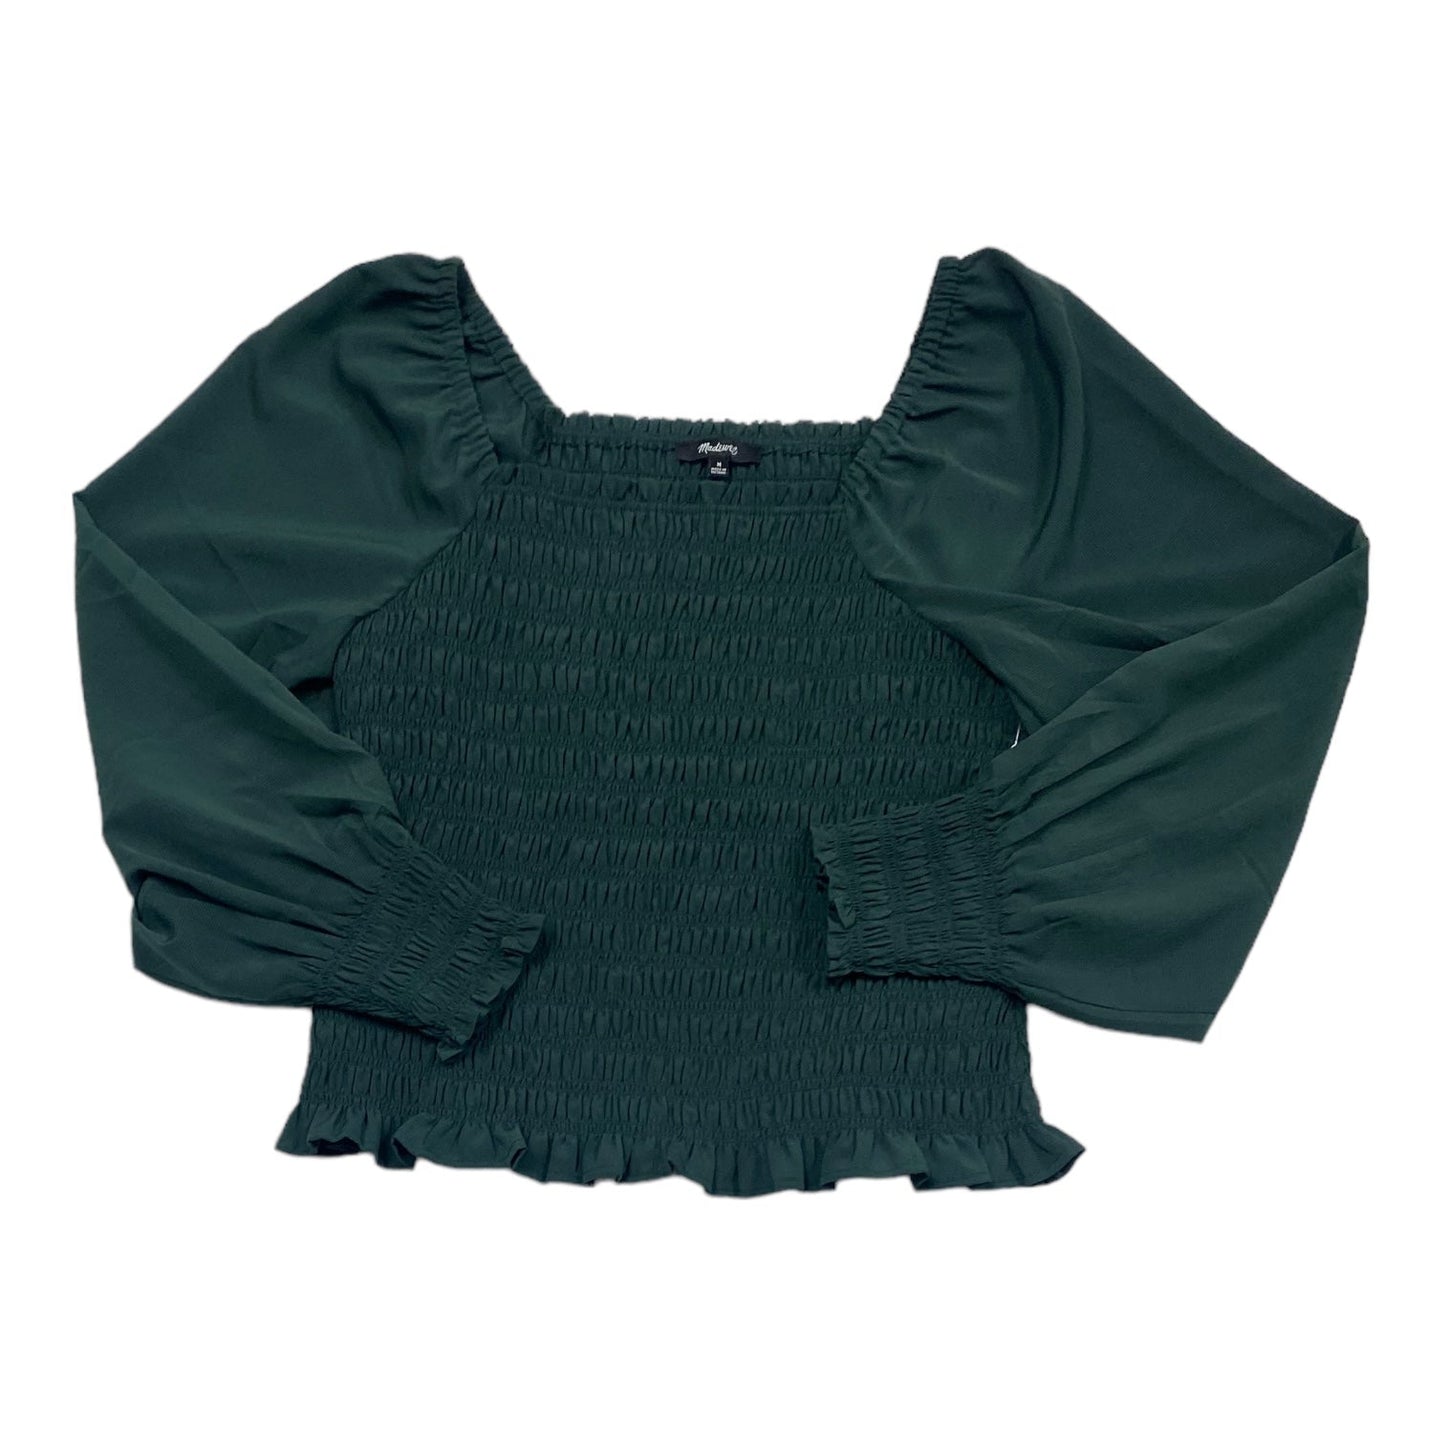 Green Top Long Sleeve Madewell, Size M